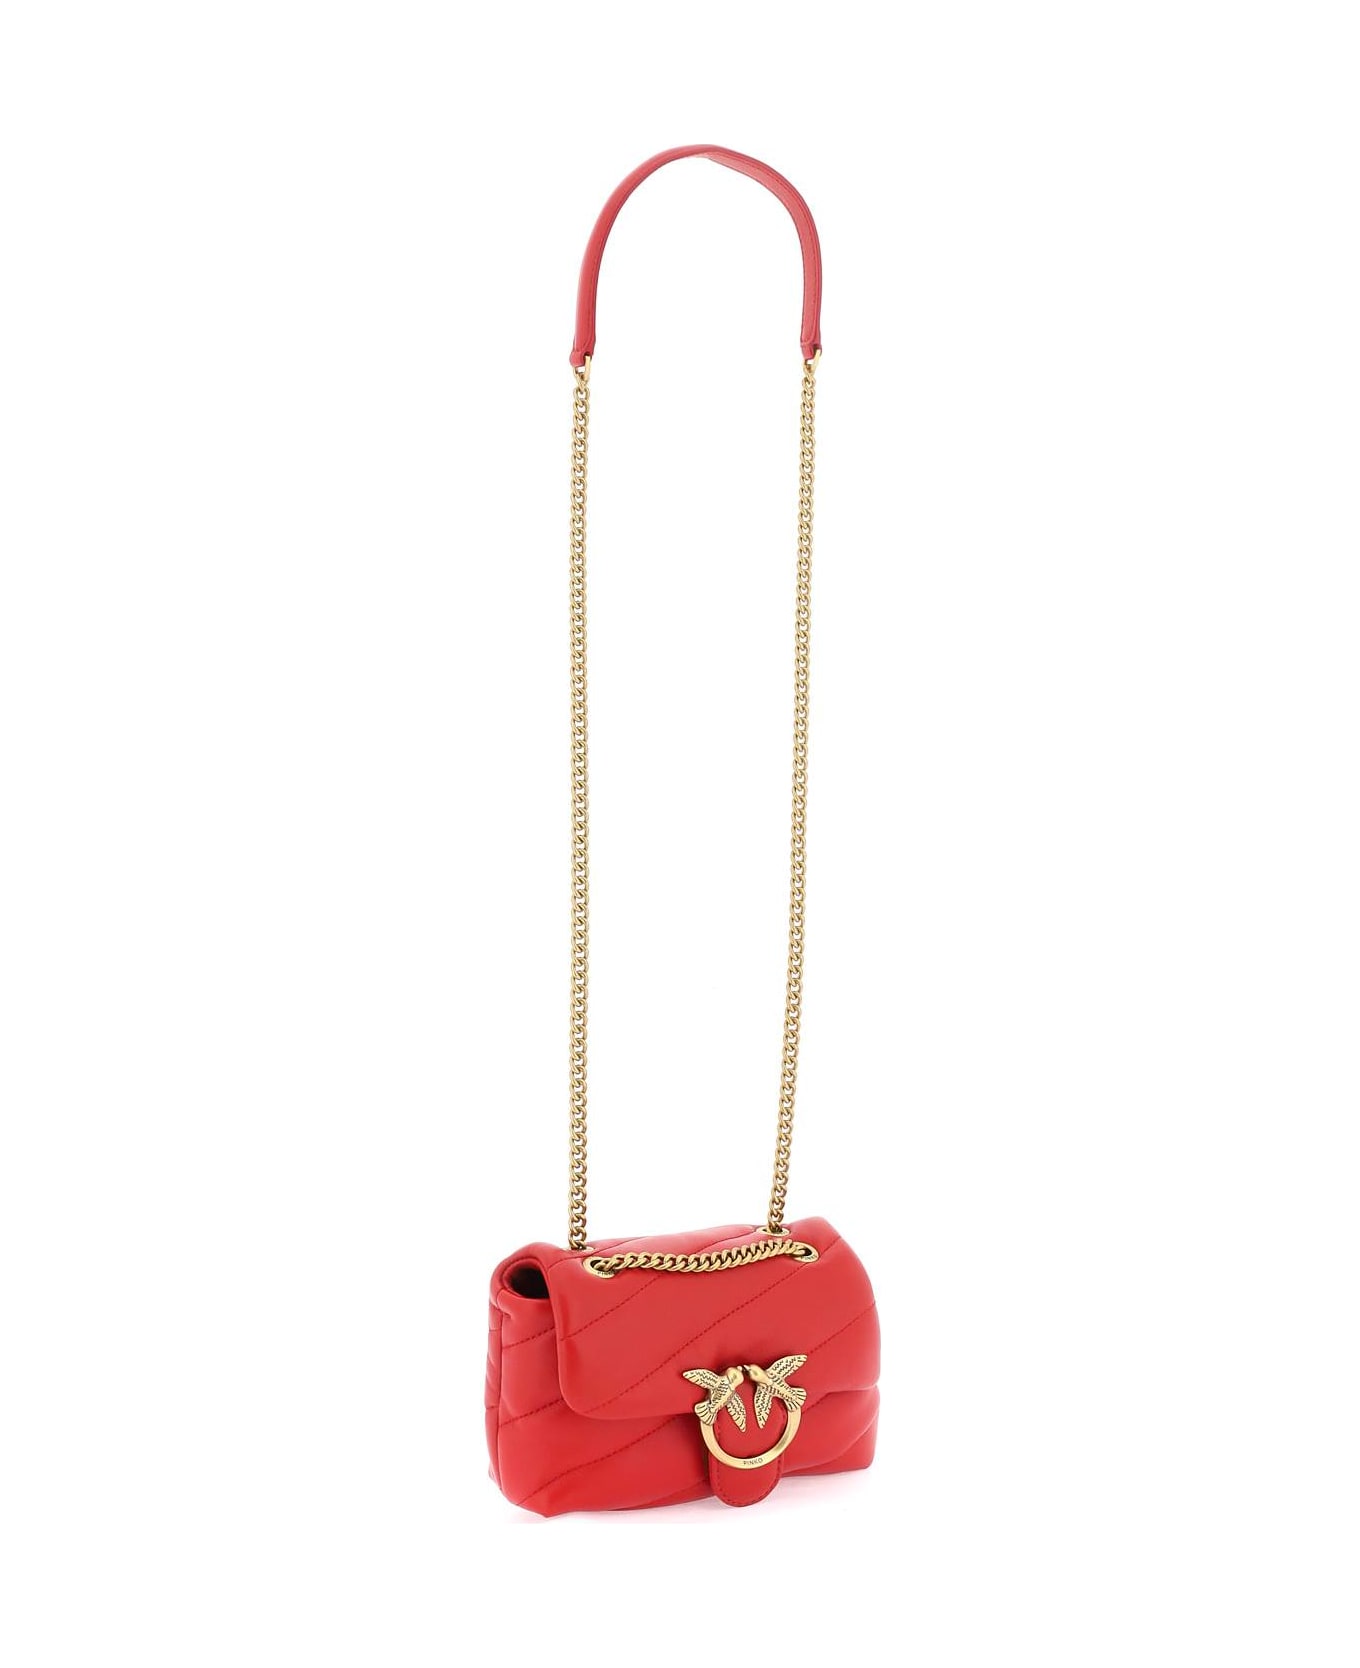 Pinko Love Baby Puff Quilt Bag - ROSSO ANTIQUE GOLD (Red) ショルダーバッグ